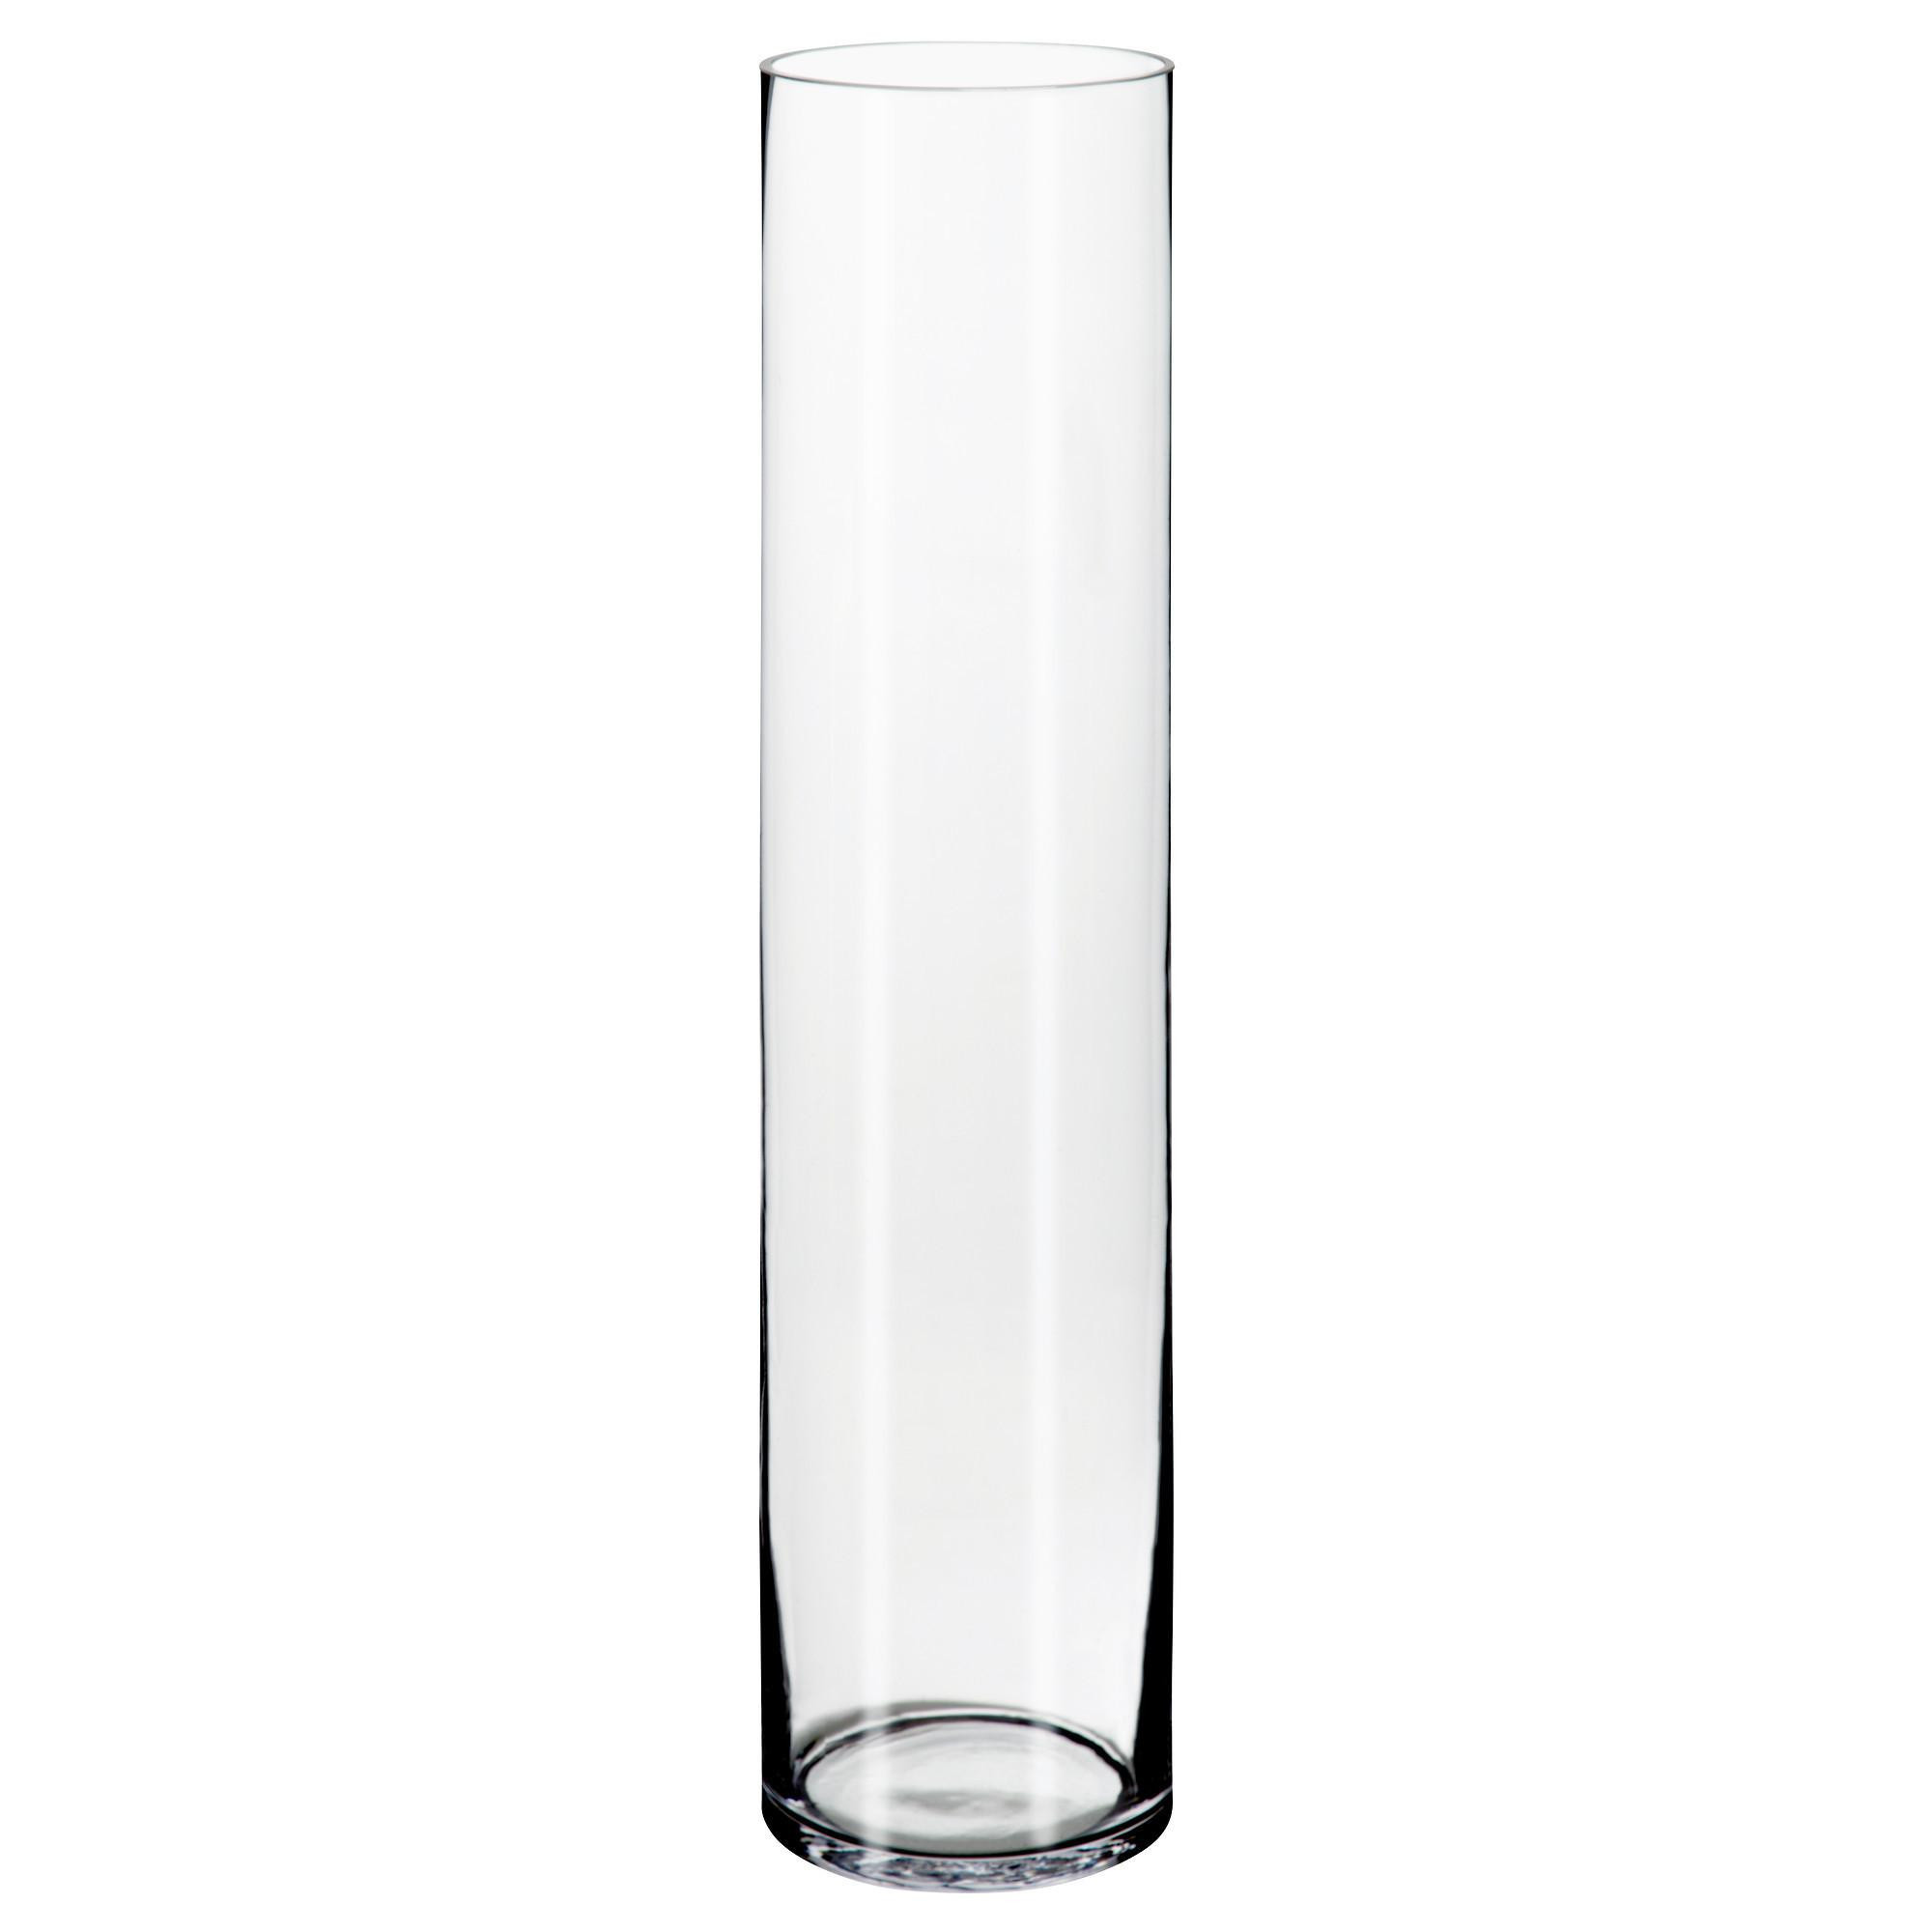 23 Perfect Small Hurricane Vase 2024 free download small hurricane vase of floor vase awesome h vases tall floor i 0d over 32 inches and design throughout floor vase beautiful coloring colored glass vases elegant living room vase glass fresh